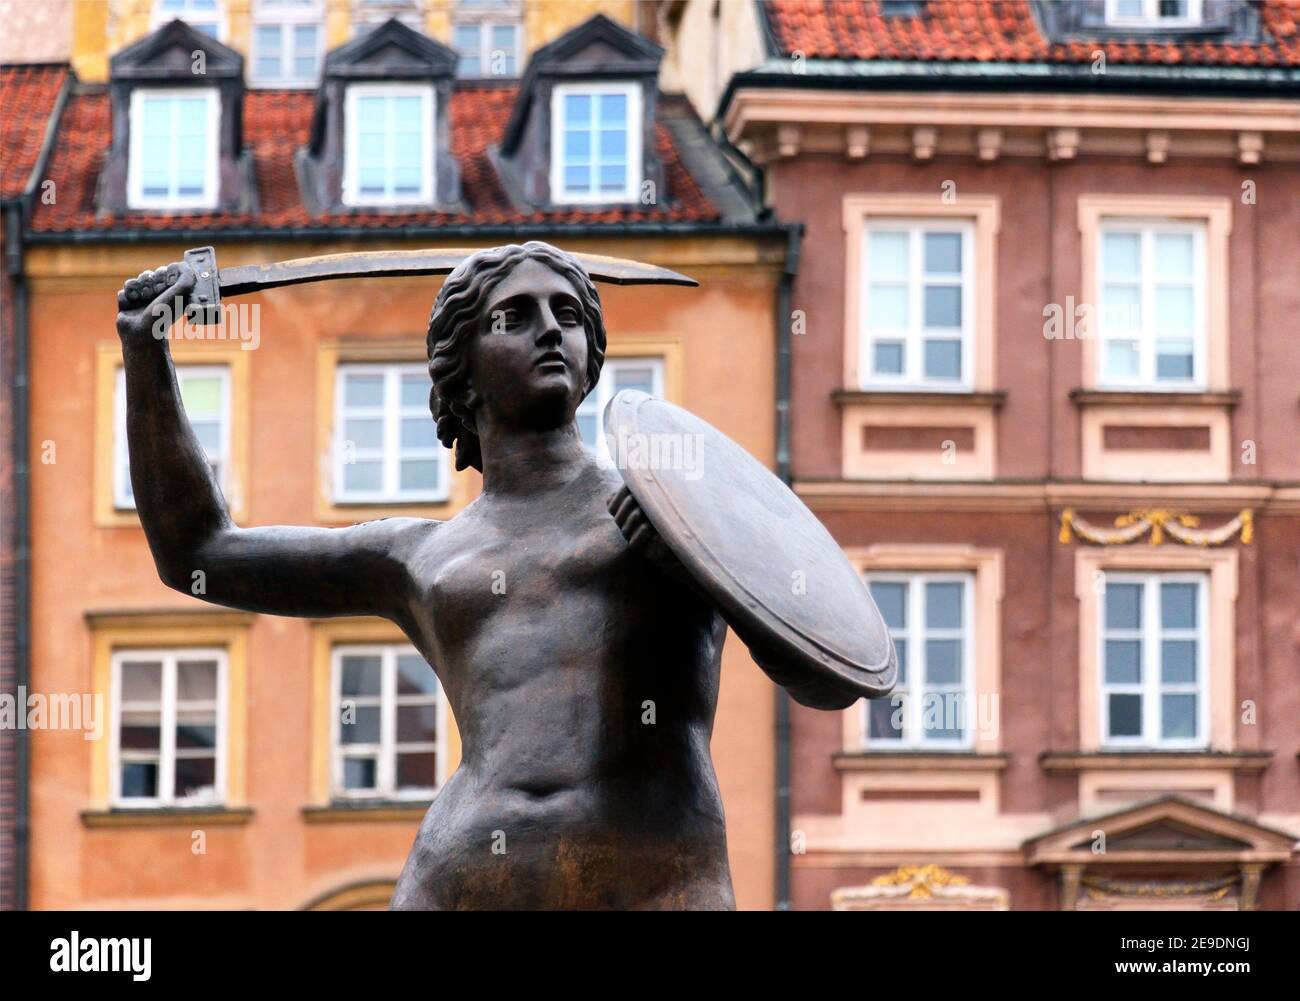 Mermaid - Syrenka - Statue by Konstanty Hegel, symbol of Warsaw, located in the center of Old Town Market Place, Warsaw, Poland, Europe Stock Photo